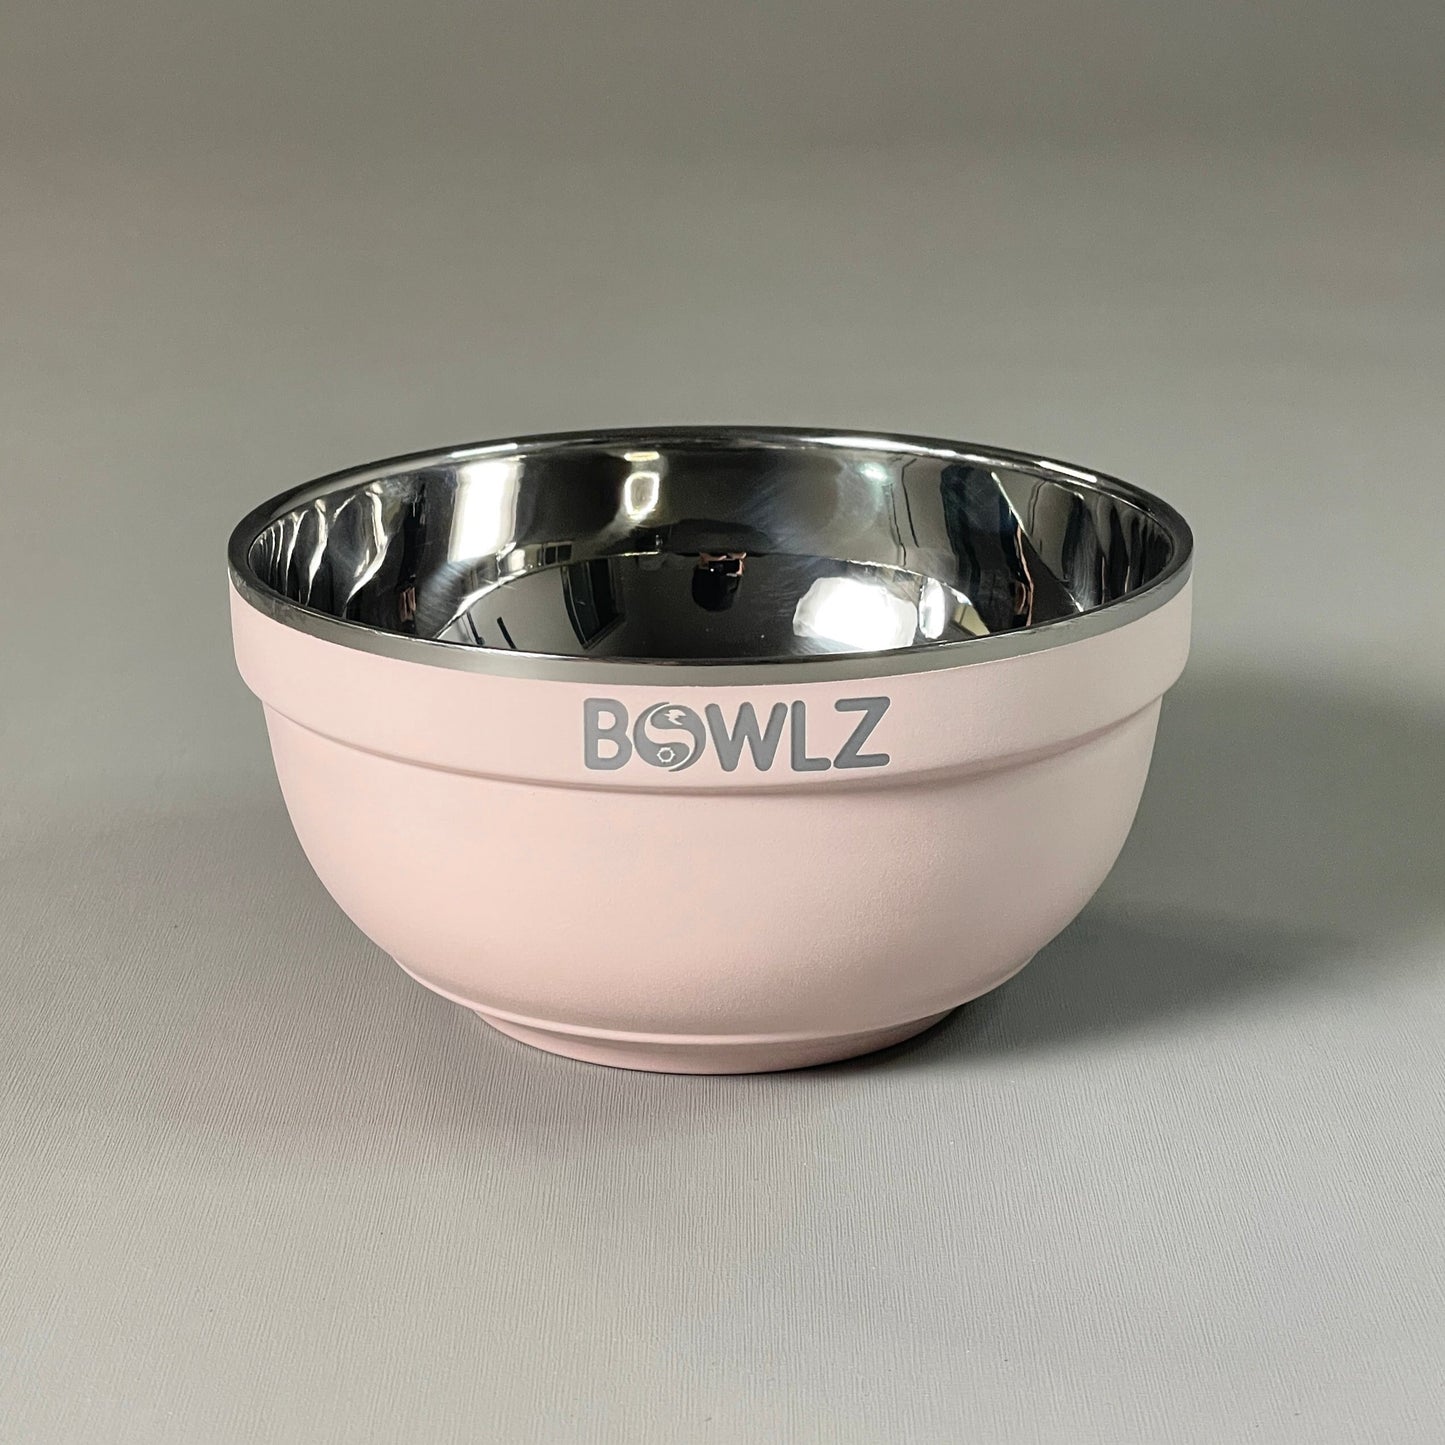 BOWLZ Stainless Steel Insulated Bowl 16 oz Pink (New)